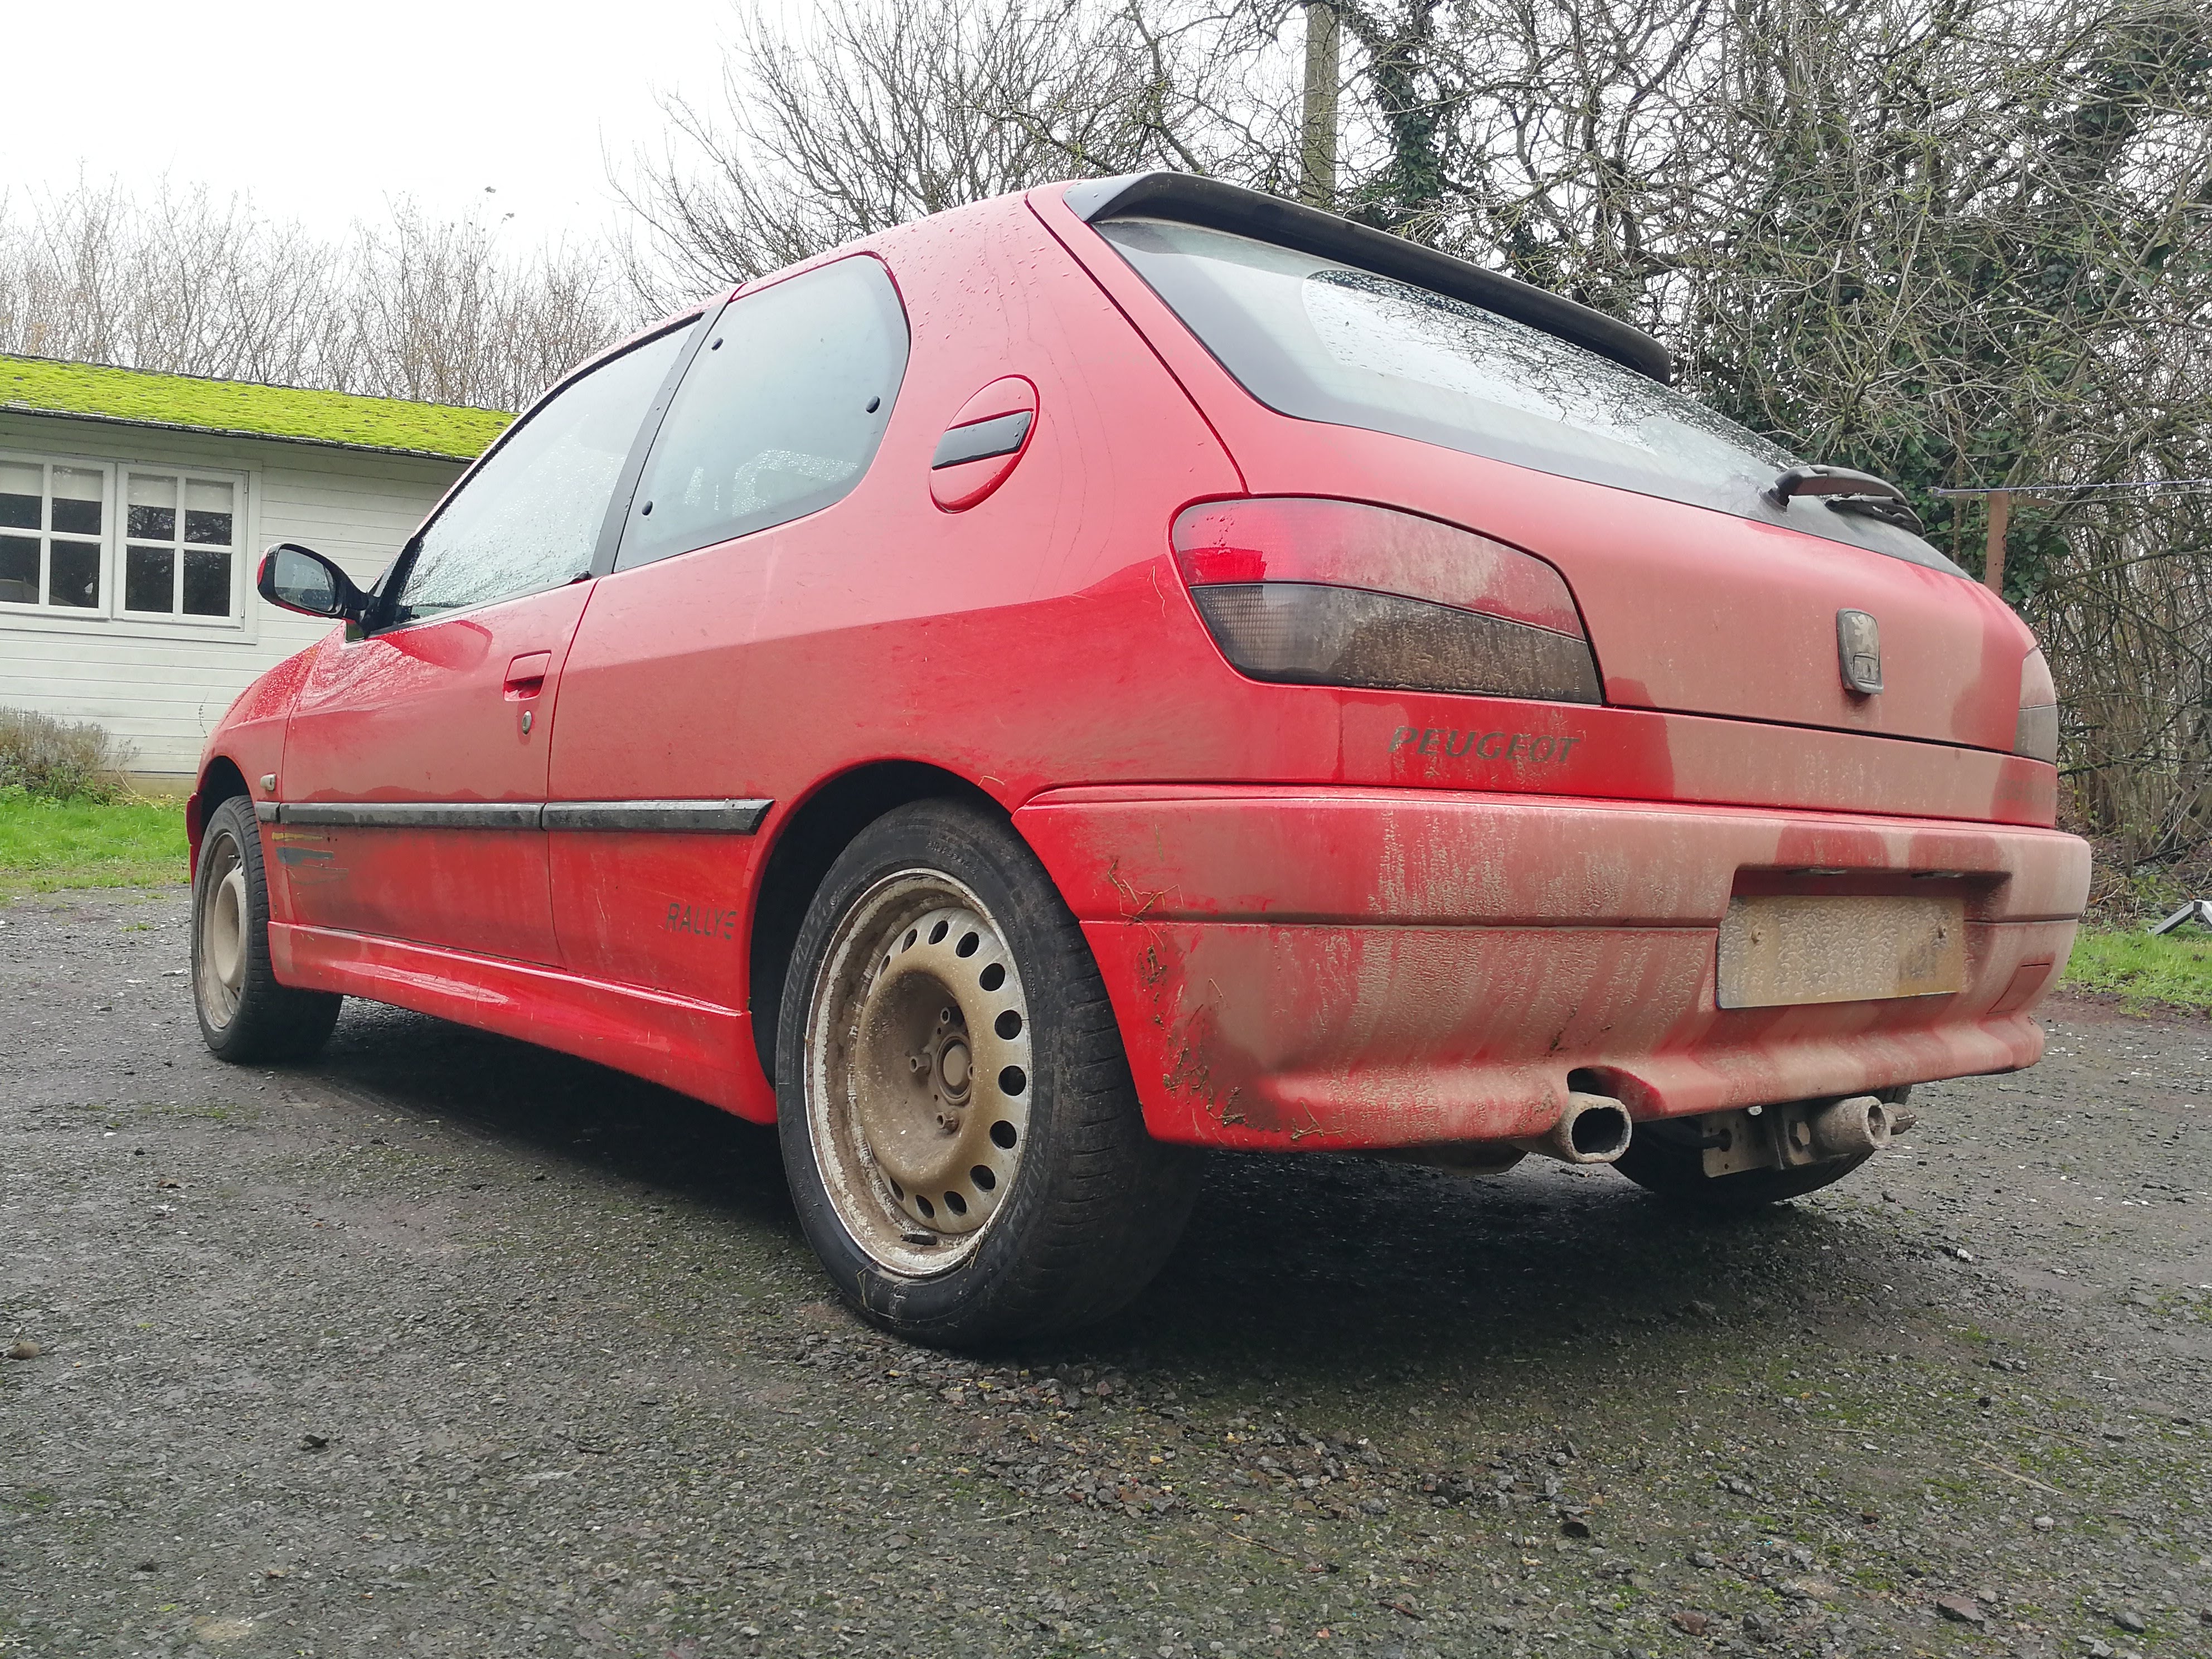 The cursed Rallye - Page 6 - Readers' Cars - PistonHeads